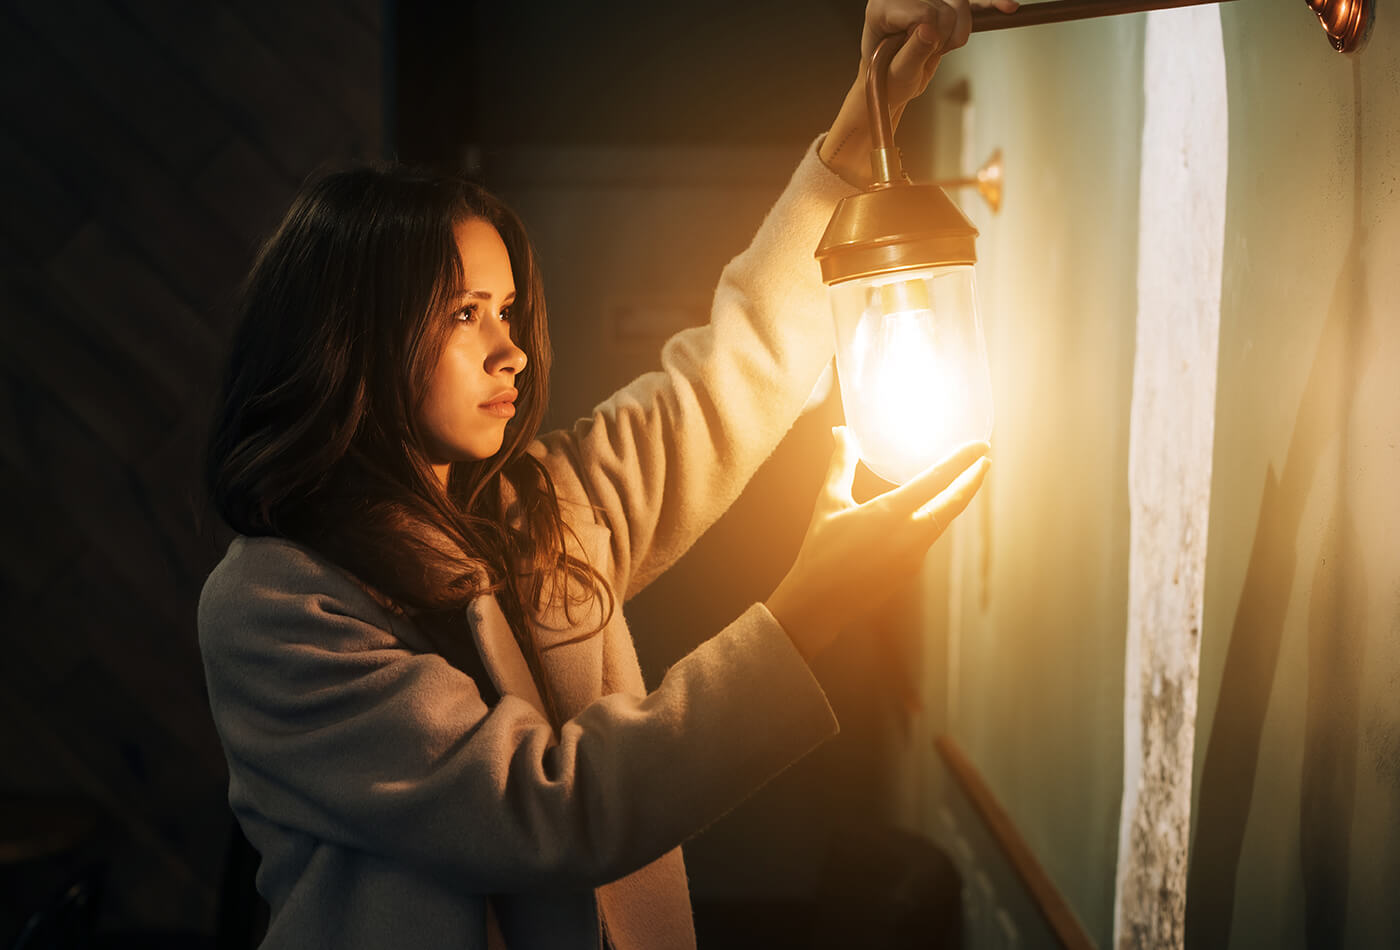 Lighting Mistakes 101: Steer Clear Of These Common Errors